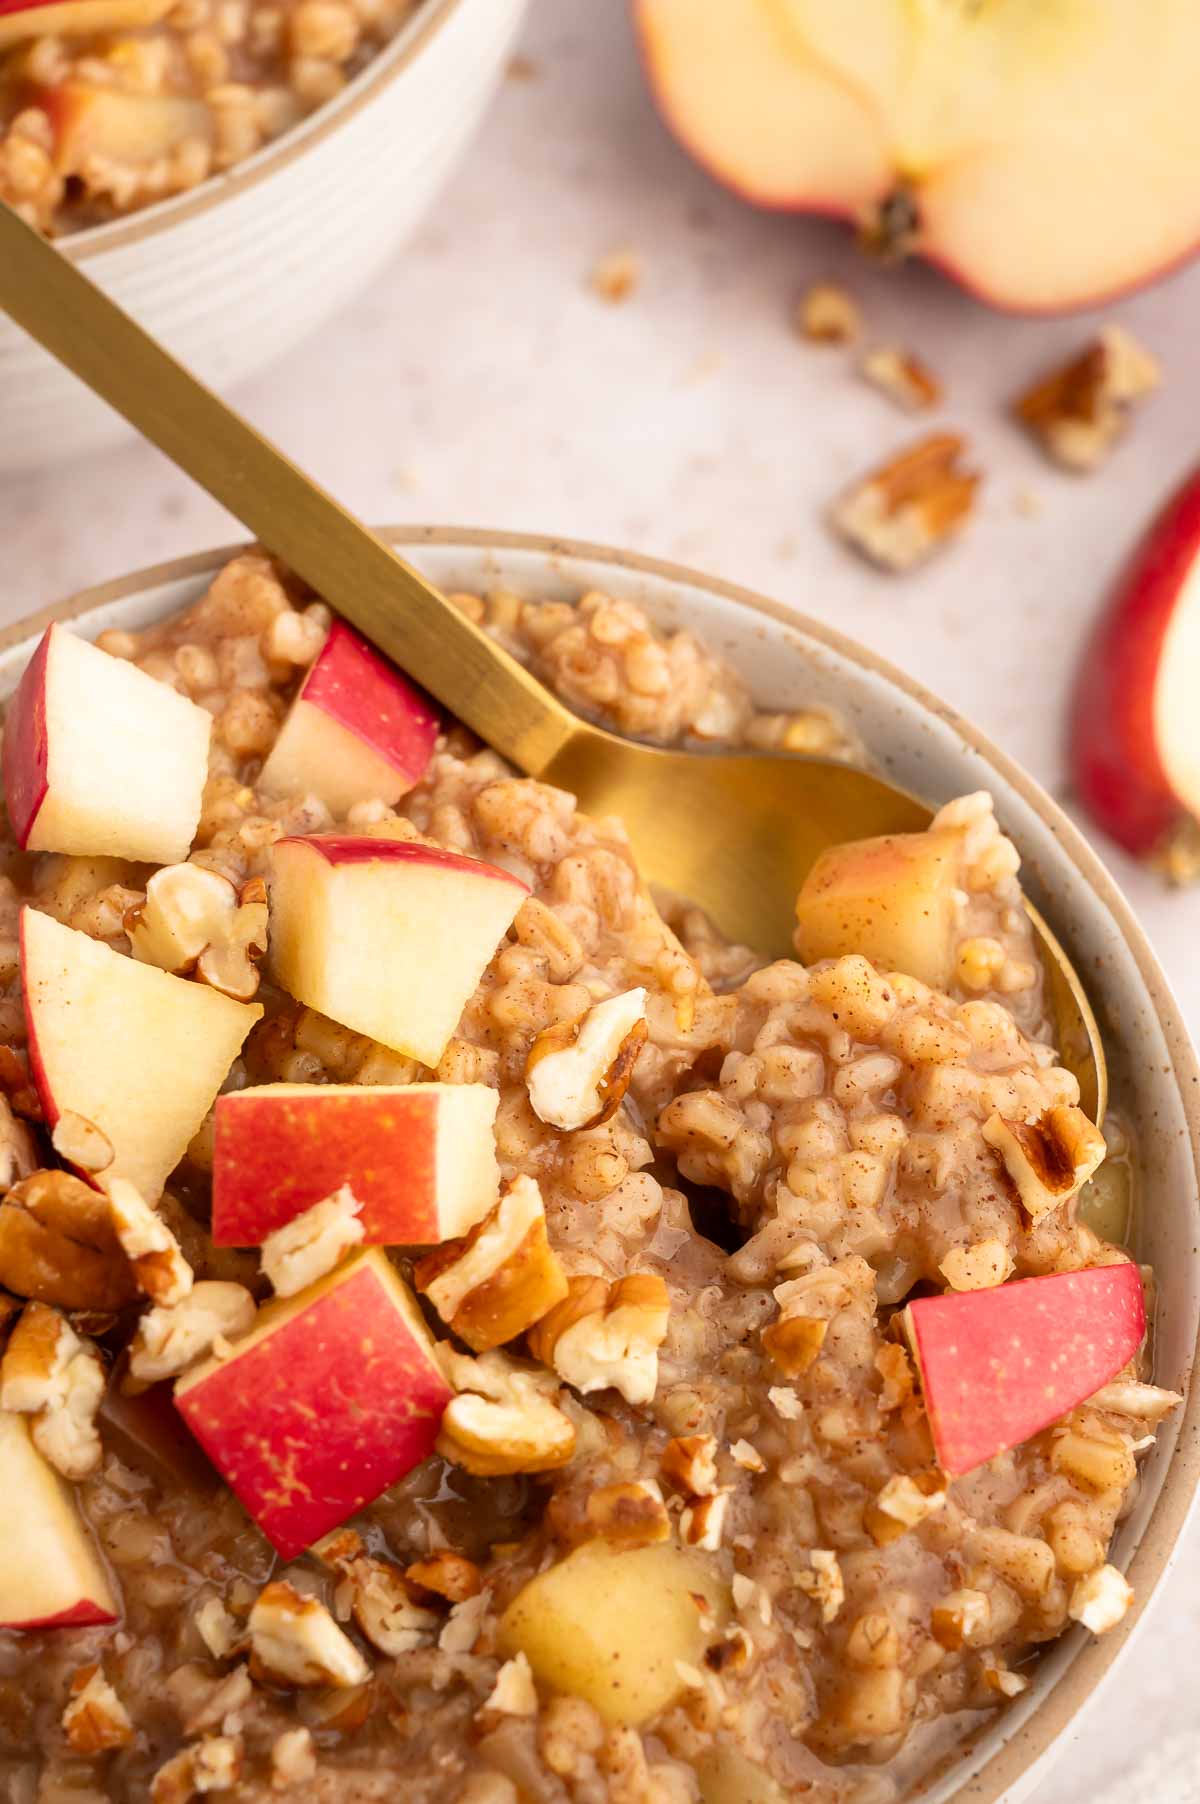 A bowl of apple cinnamon oats with chunks of fresh apples.